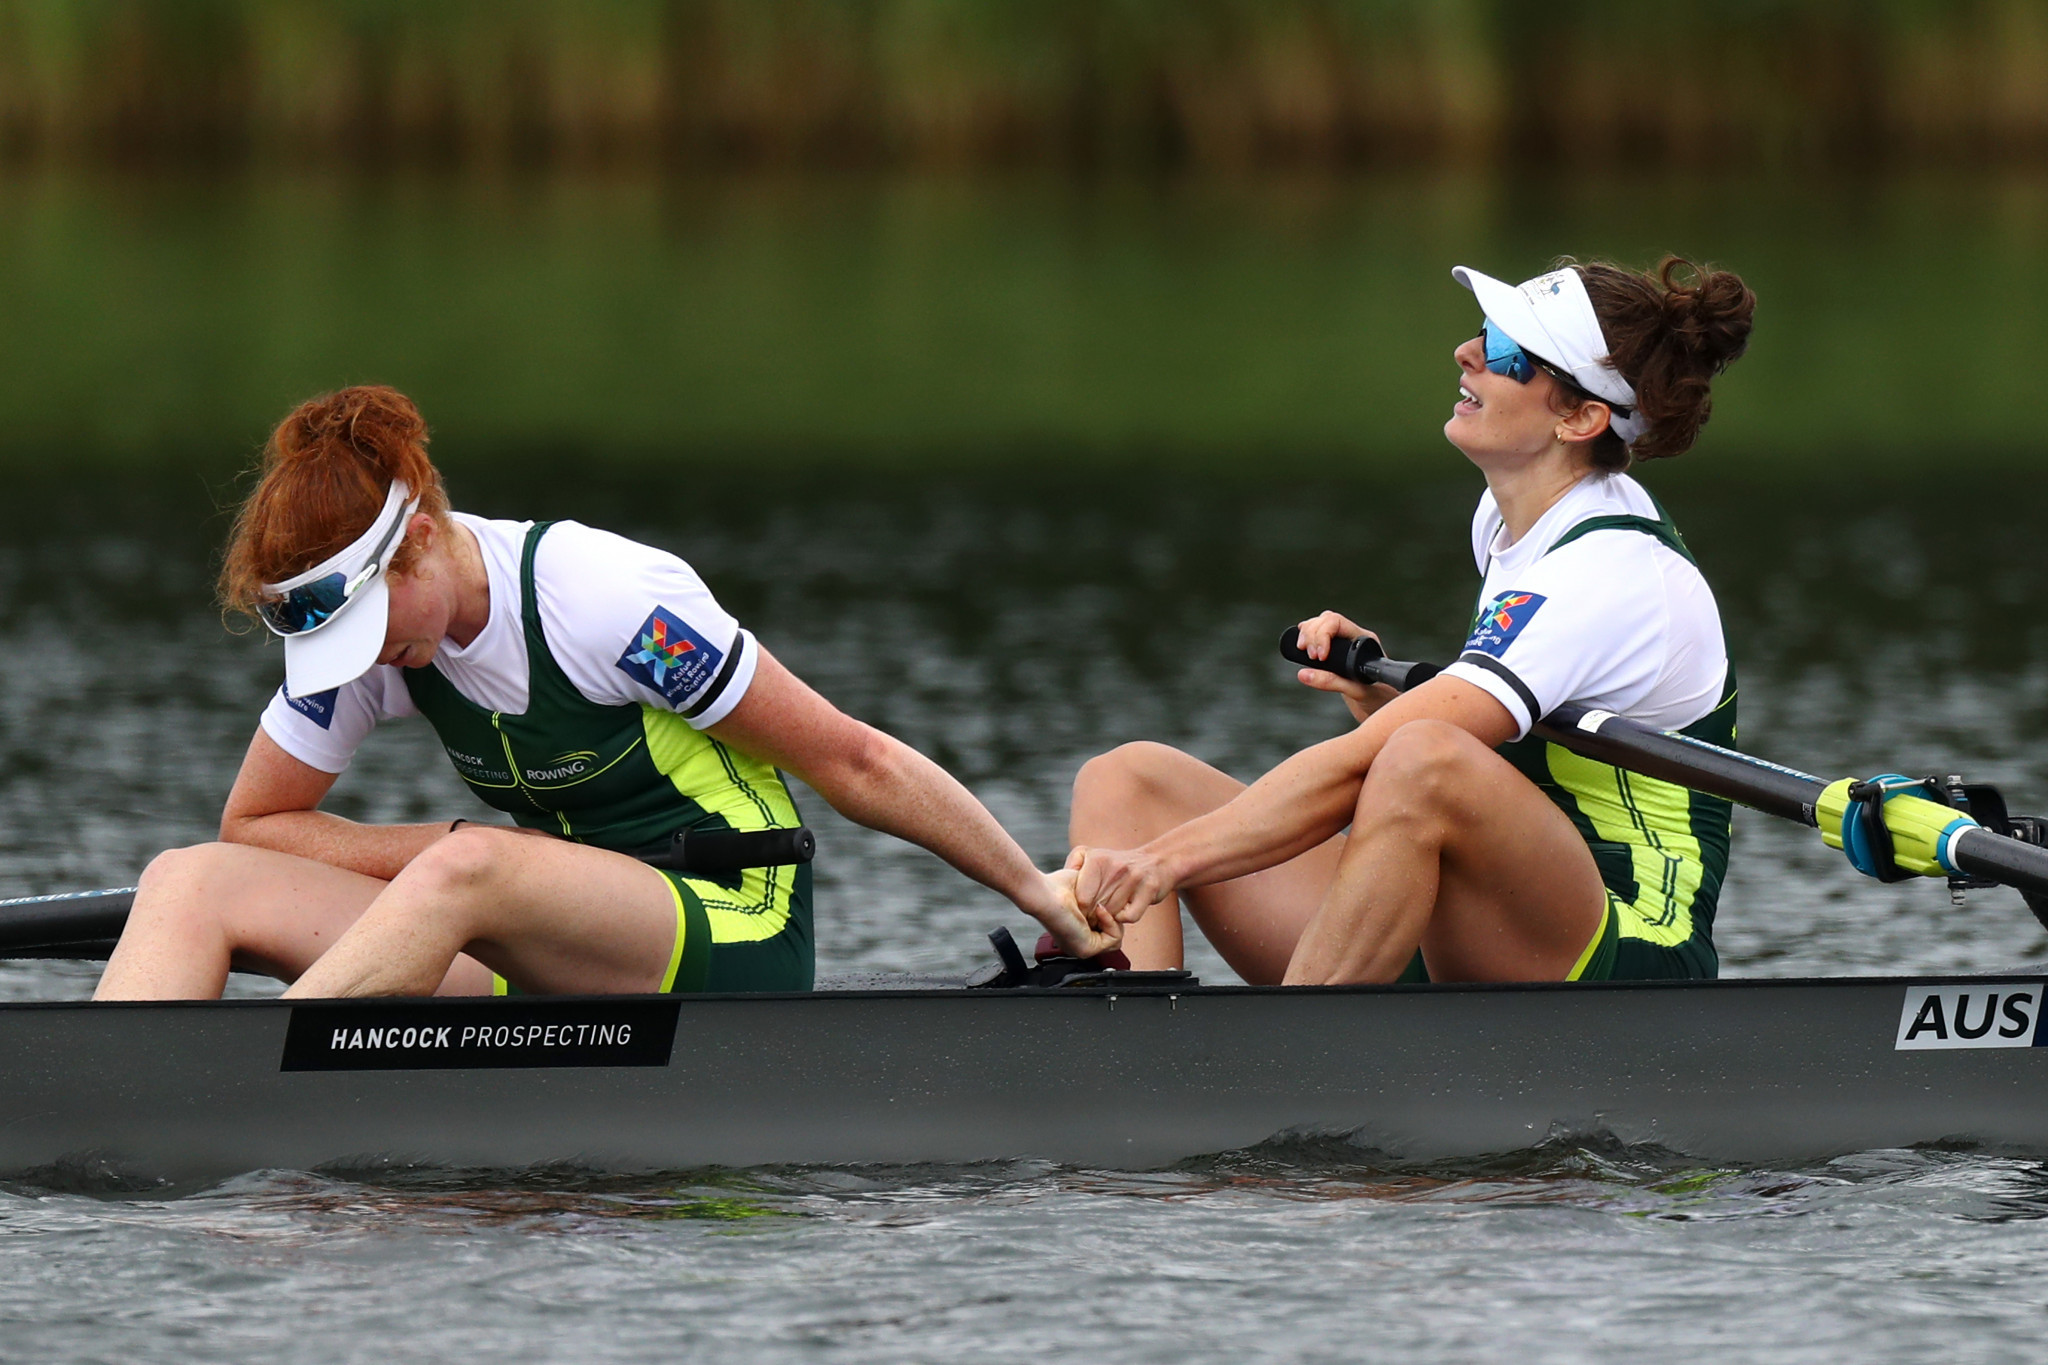 Jessica Morrison and Annabelle McIntyre of Australia won their women's pairs heat at the World Rowing Championships ©Getty Images